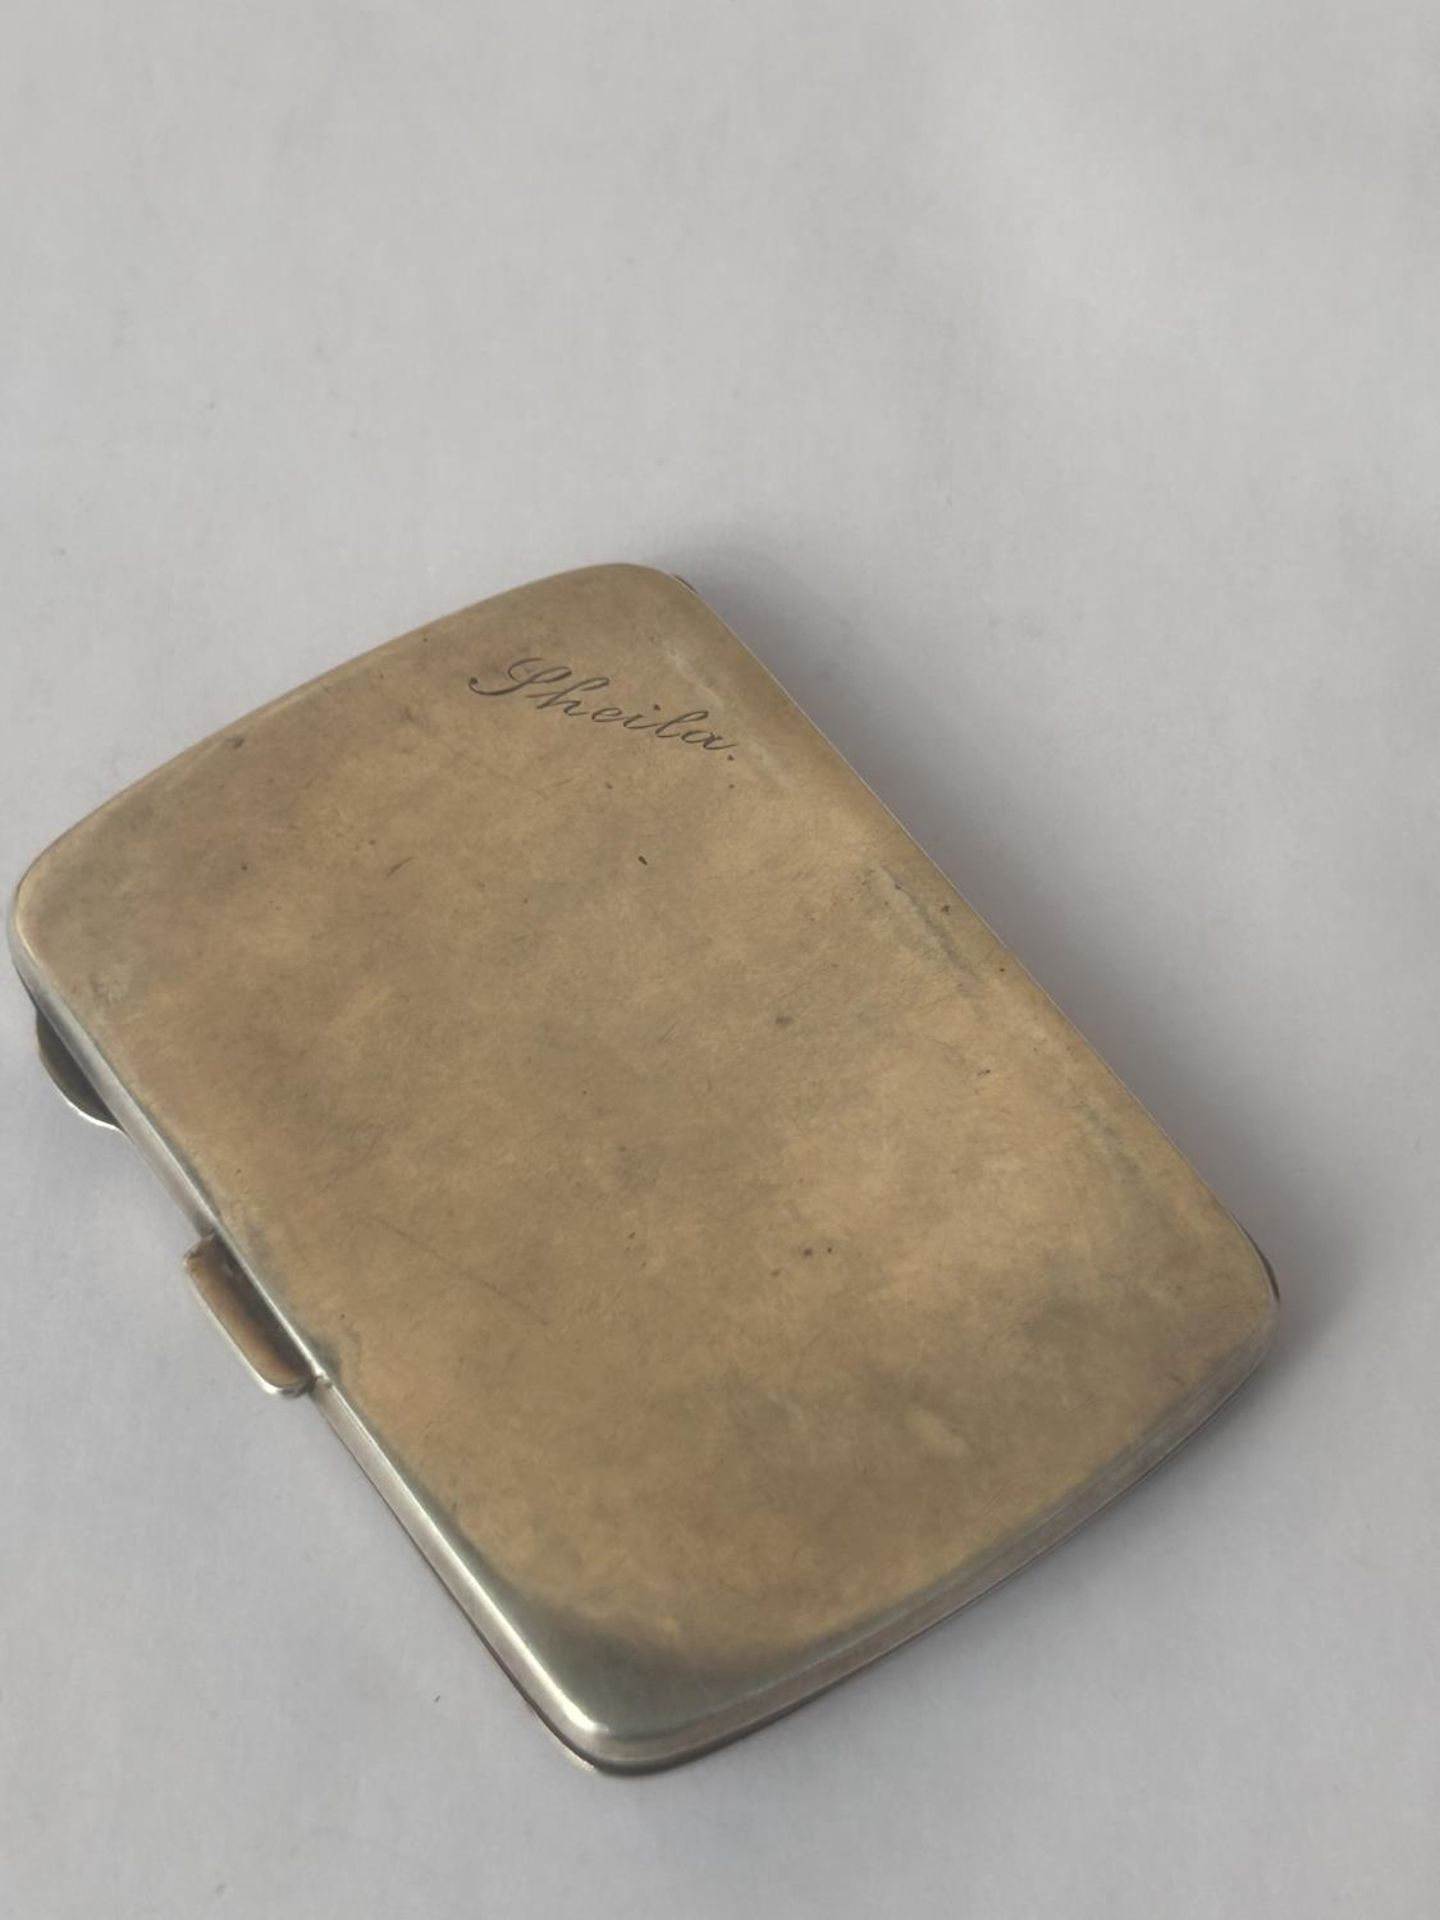 A GEORGE V HALLMARKED SILVER AND GUILLOCHE ENAMELED CIGARETTE CASE, BY HENRY MATTHEWS BIRMINGHAM - Image 5 of 5